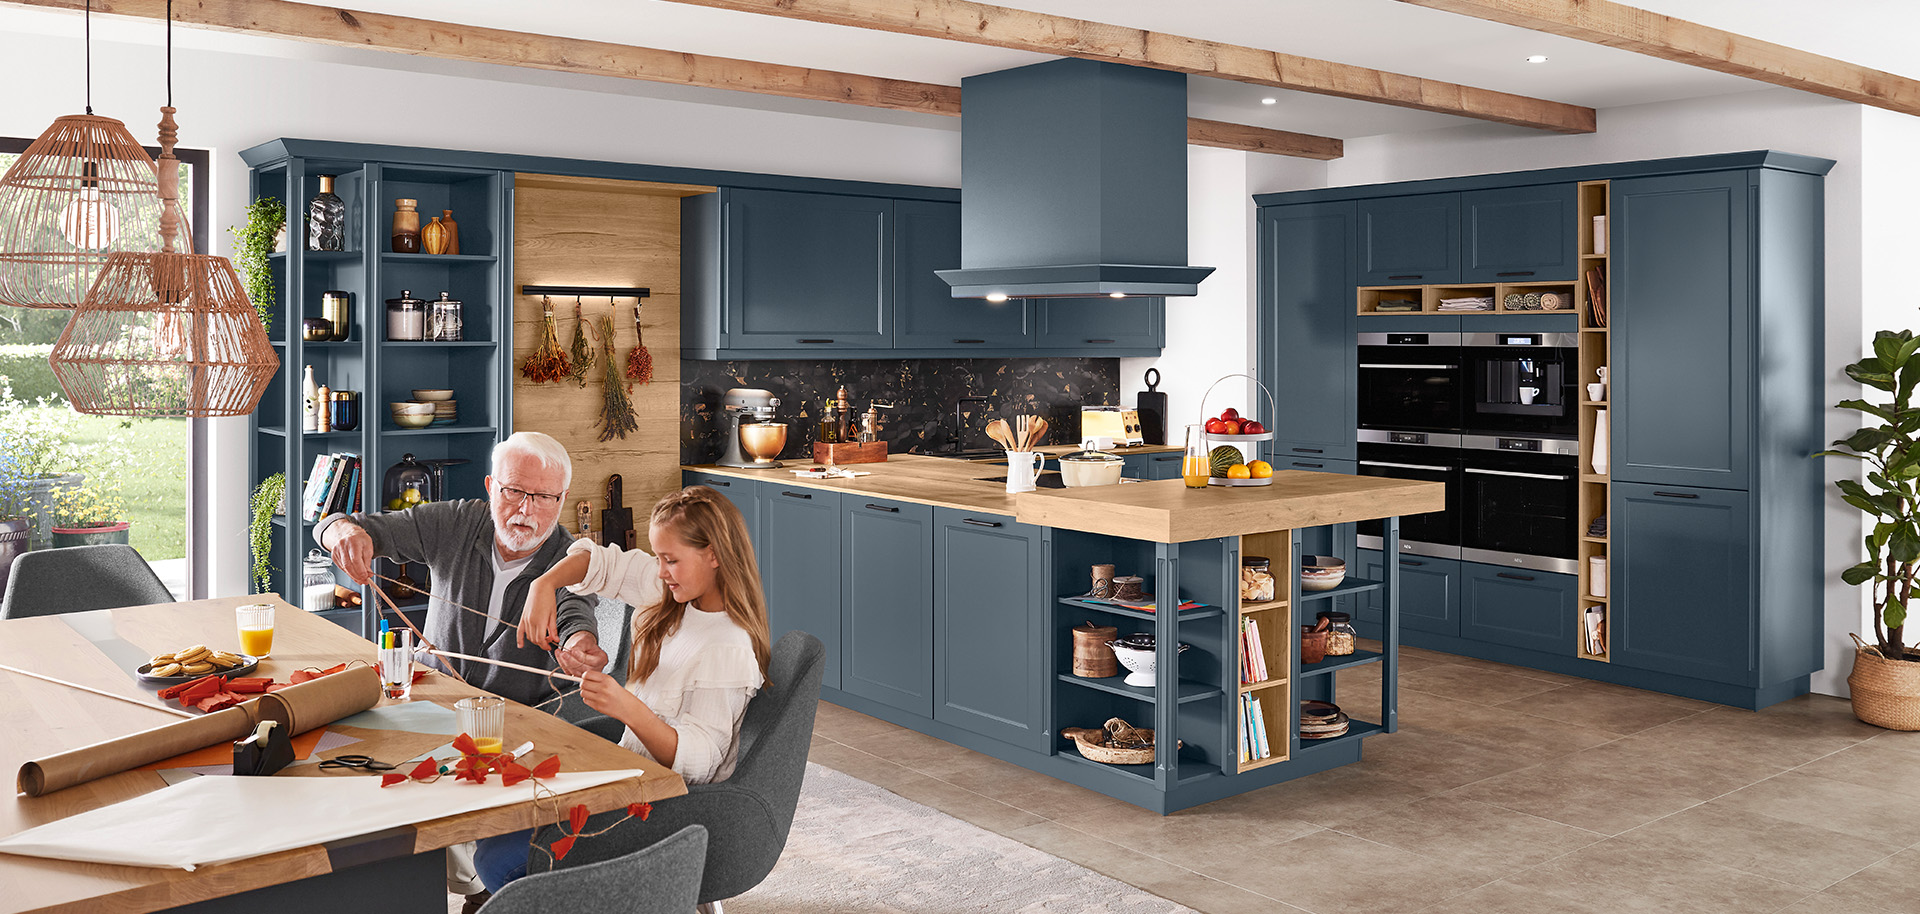 A spacious, modern kitchen with navy blue cabinetry, stainless steel appliances, and an elder crafting with a child at a sunlit wooden table.